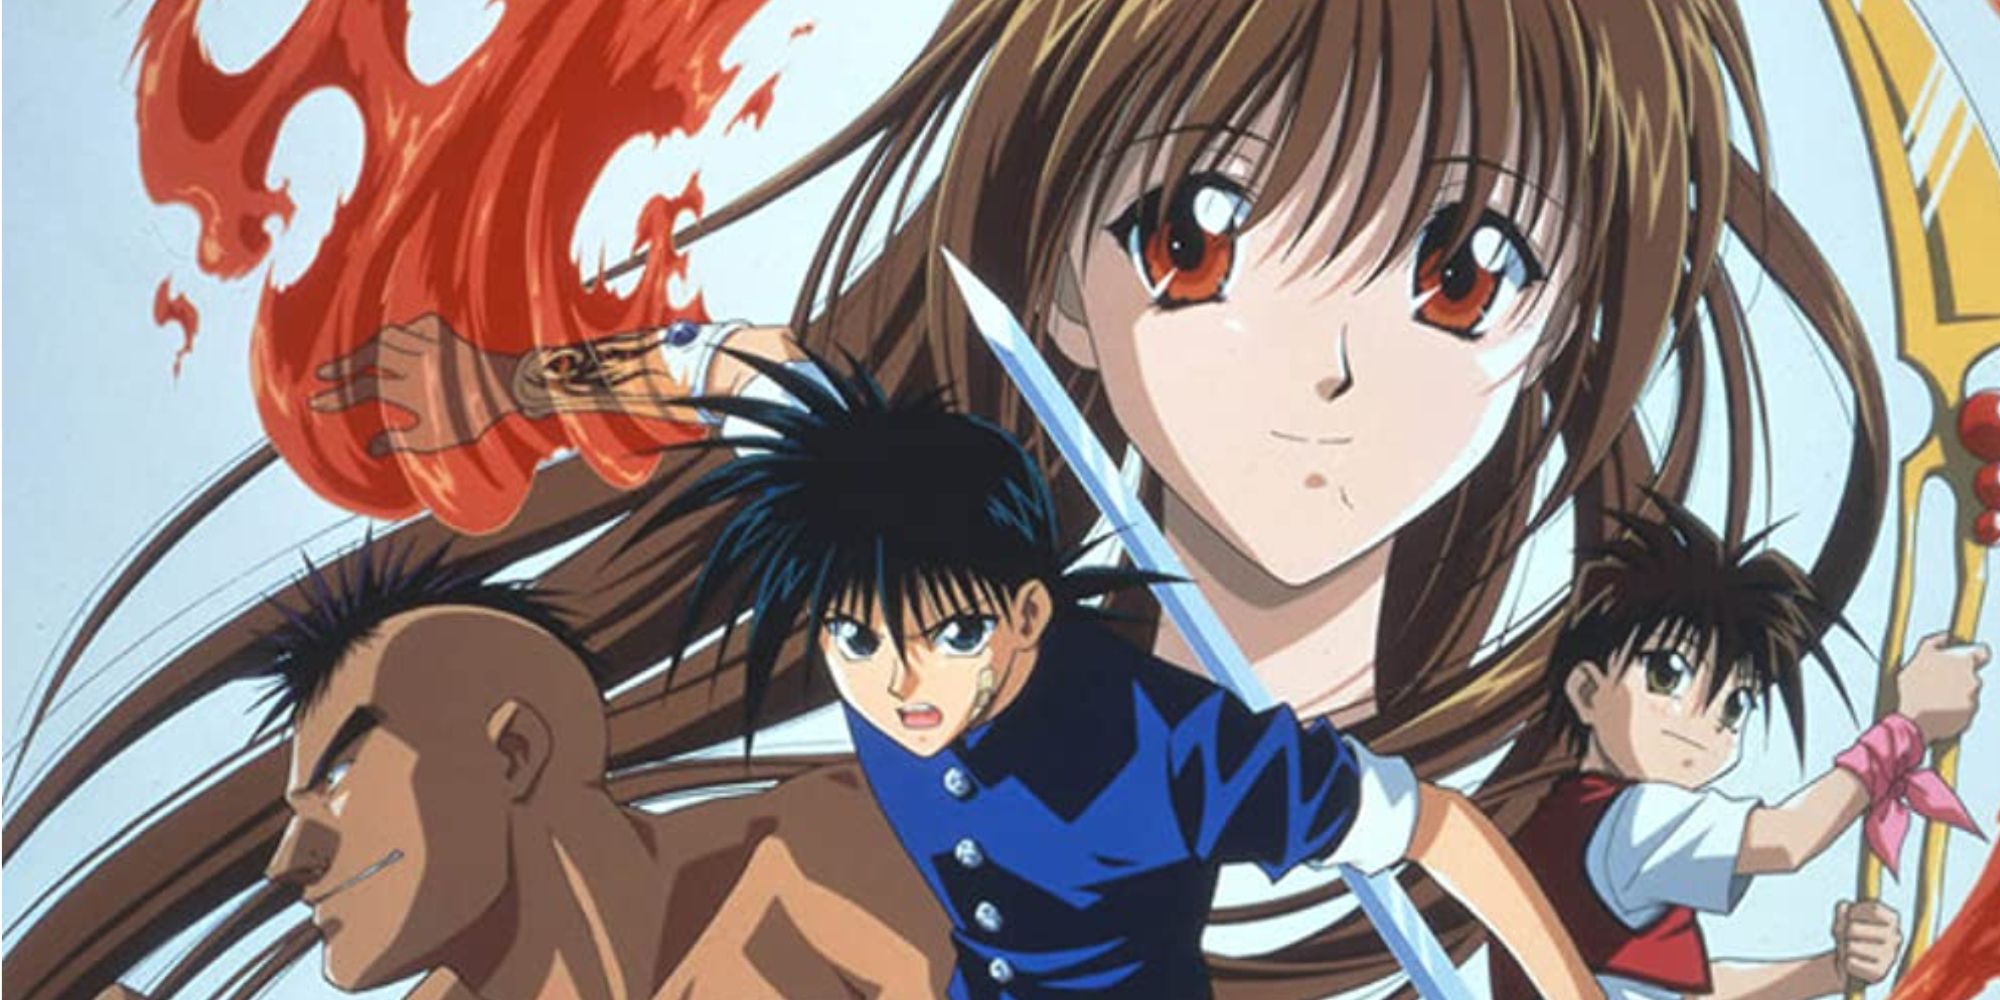 A striking collage of four characters from Flame of Recca, with the protagonist holding a sword.